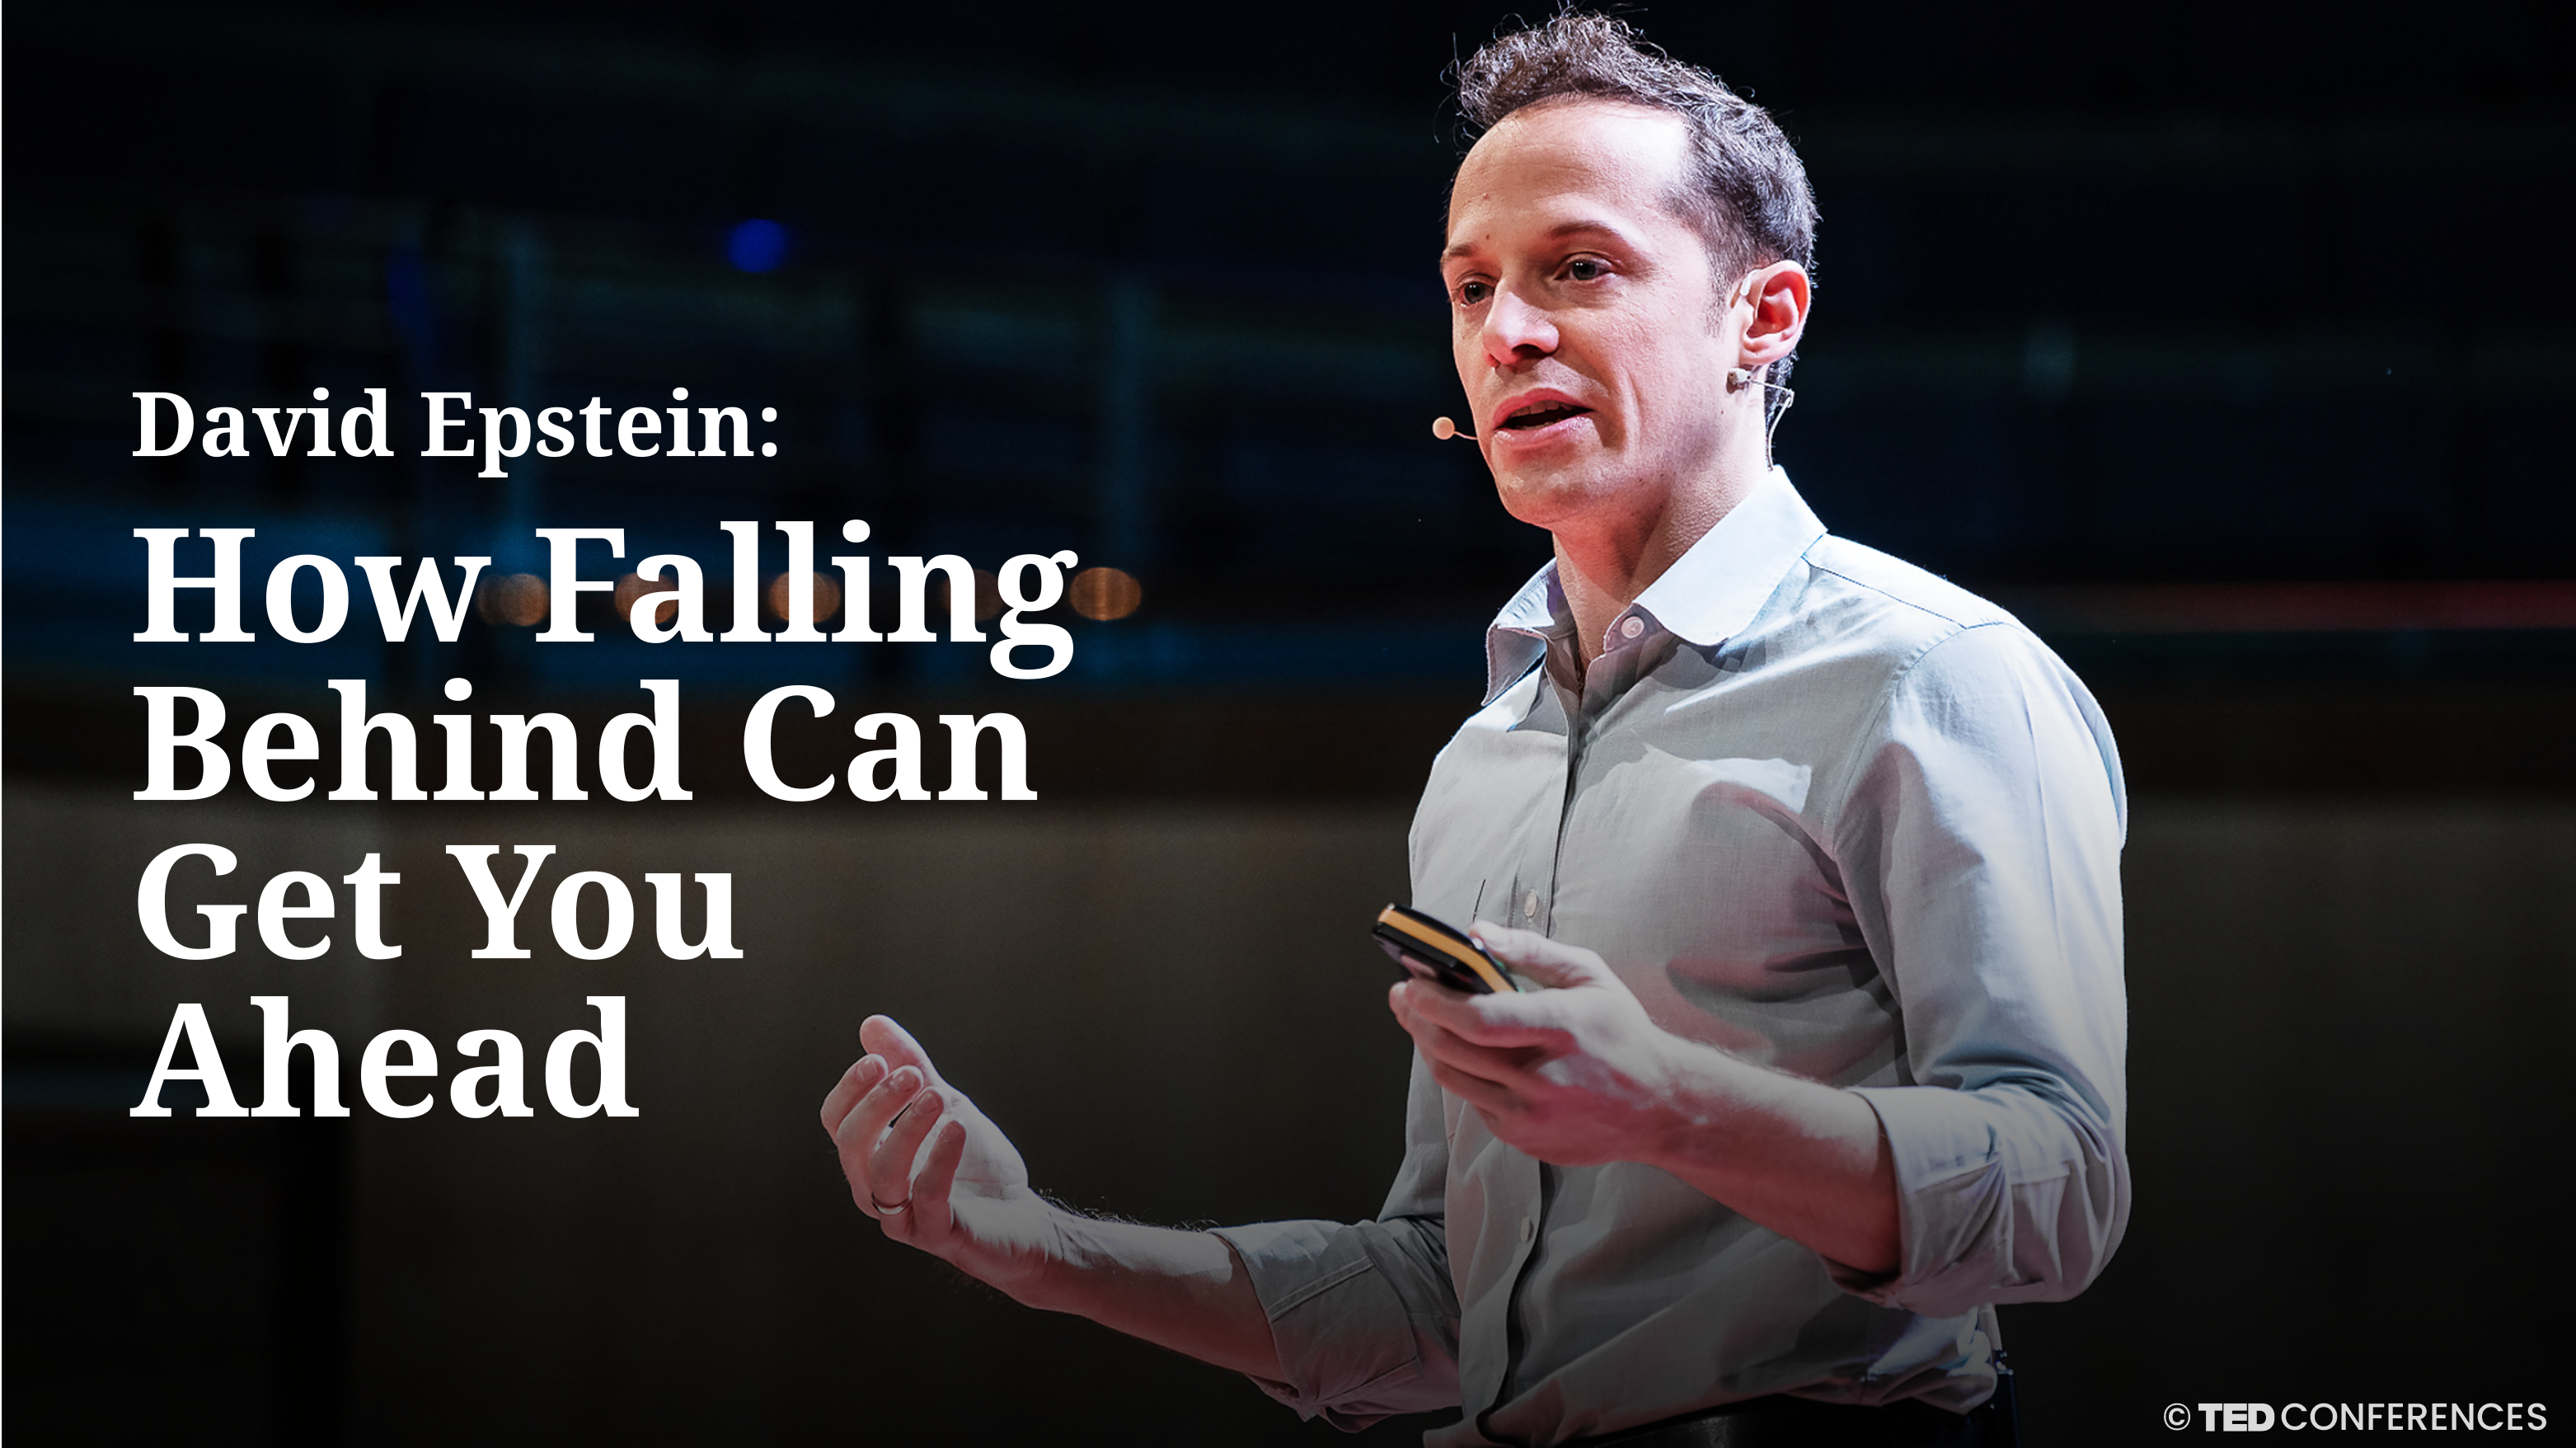 [A+] David Epstein: How Falling Behind Can Get You Ahead [PRACTICE]